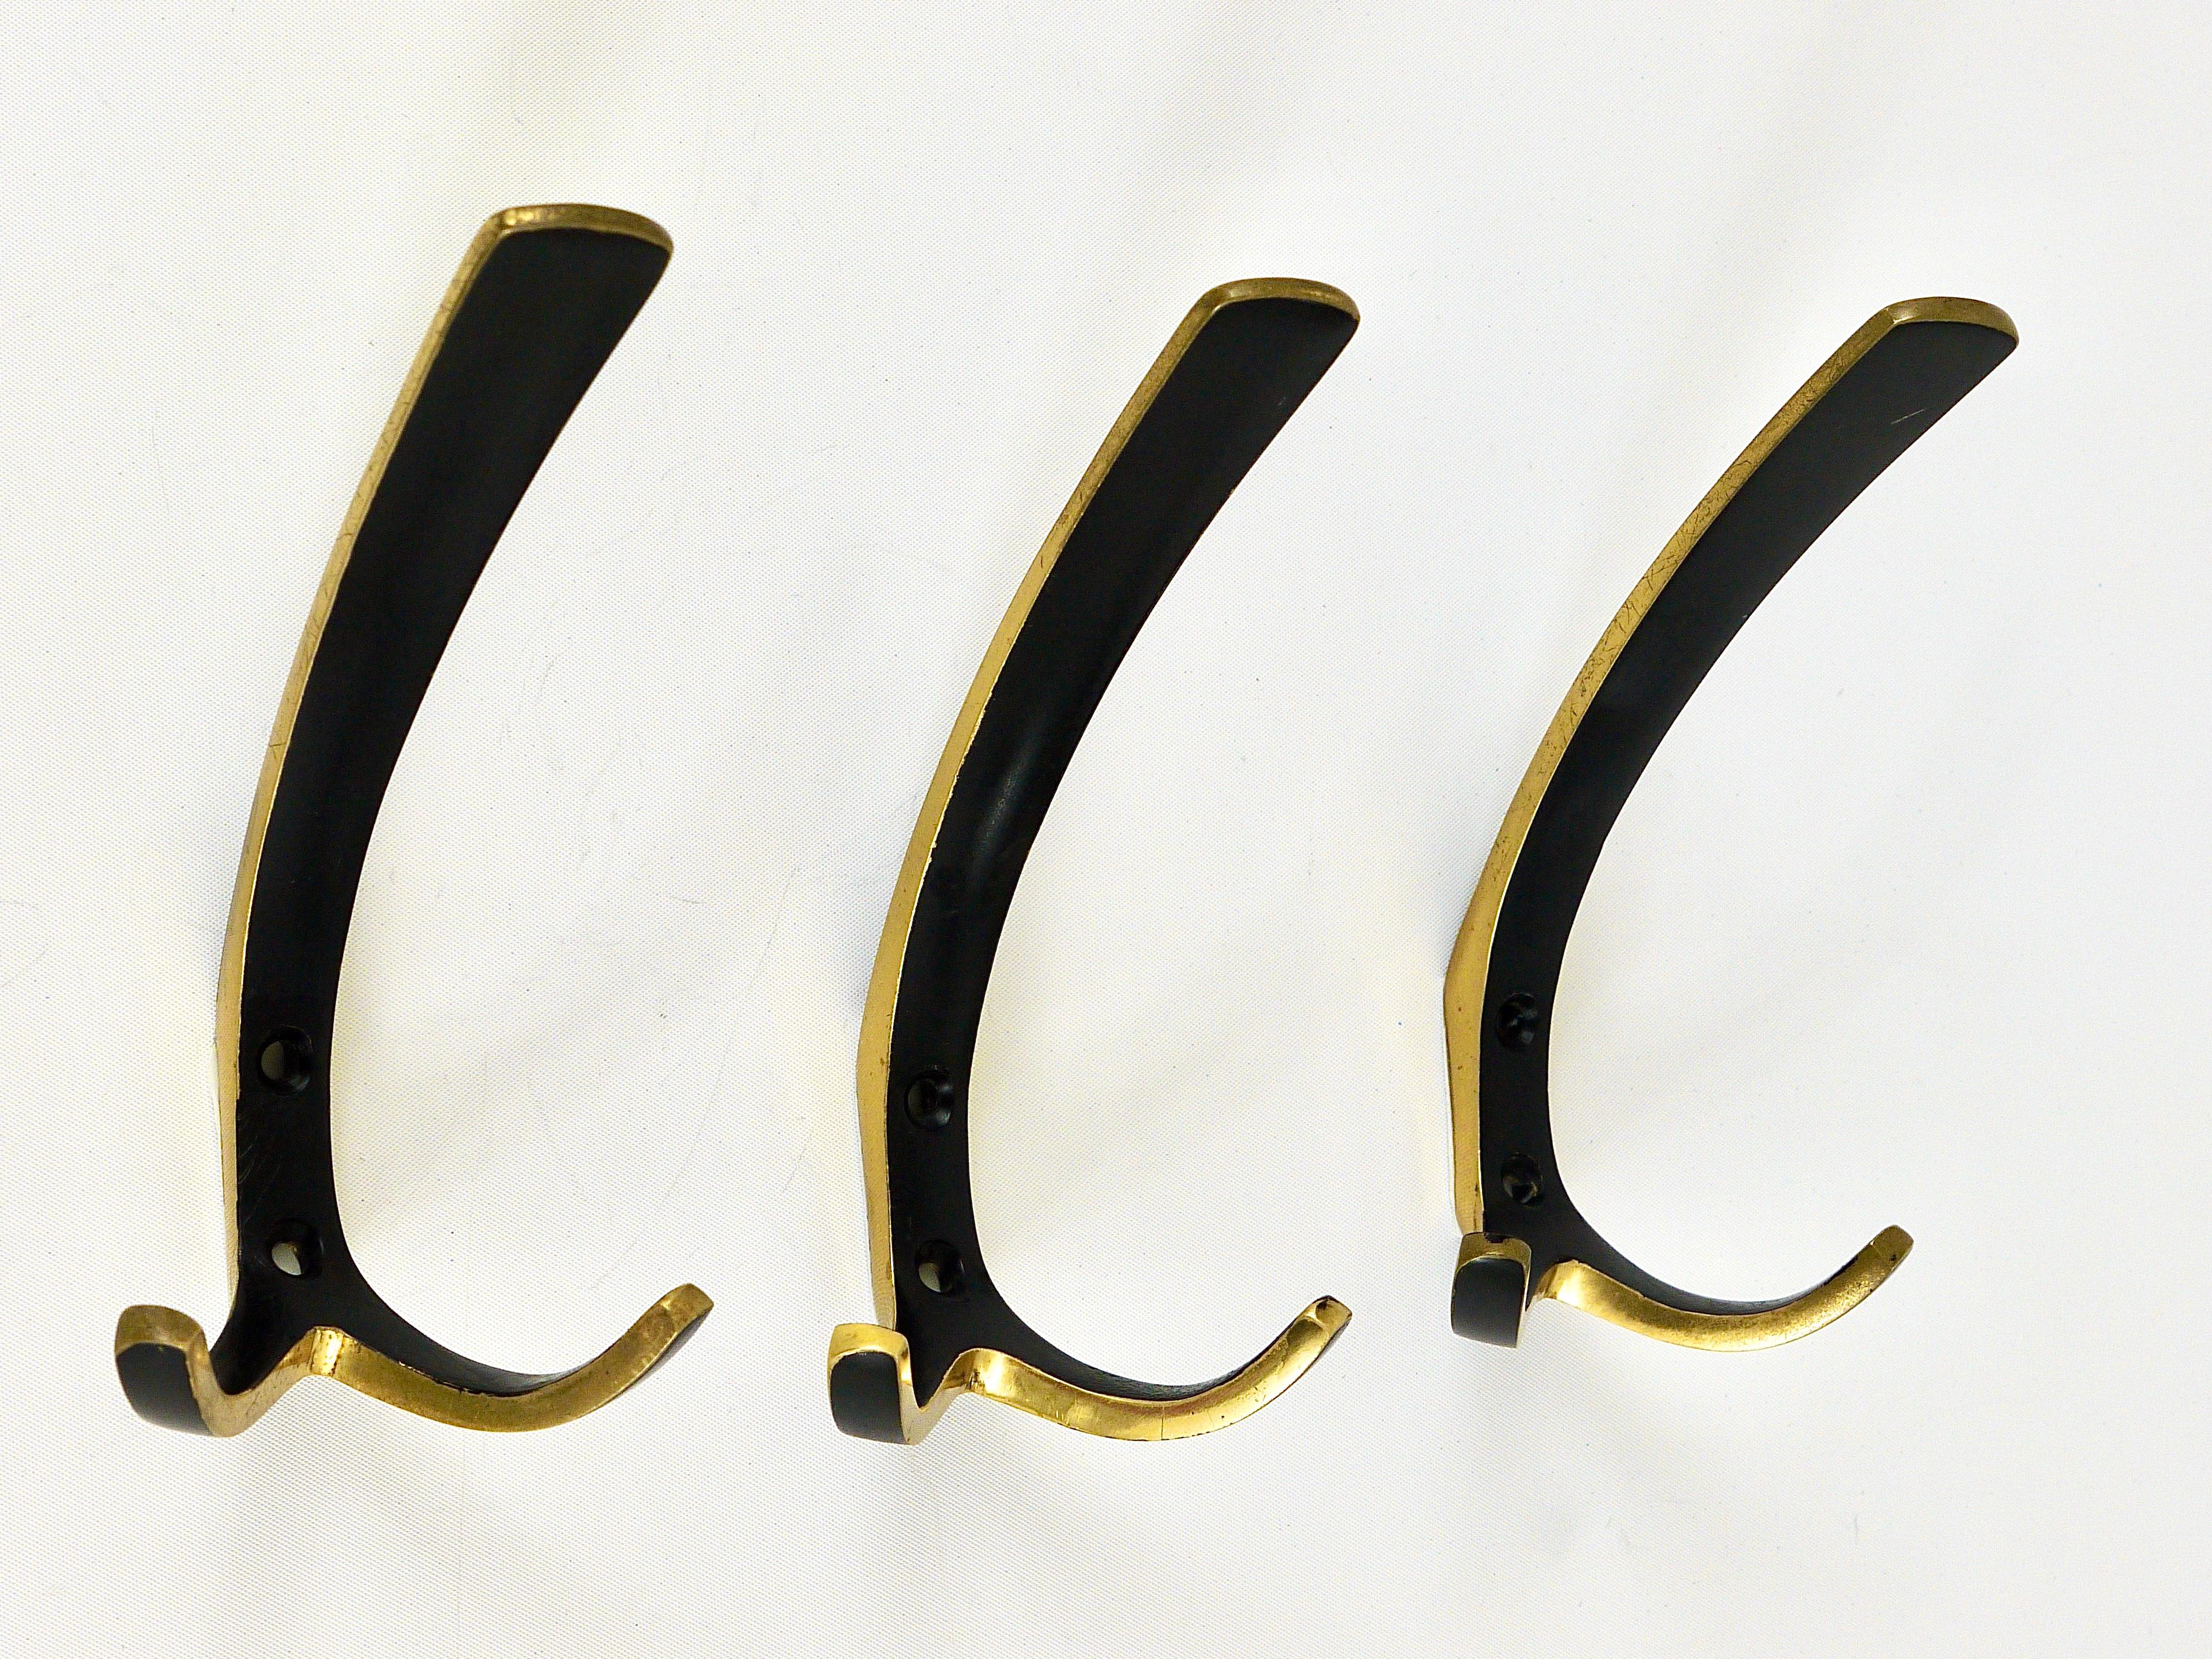 Up to 10 Midcentury Brass Double Wall Hooks by Herta Baller, Austria, 1950s For Sale 2